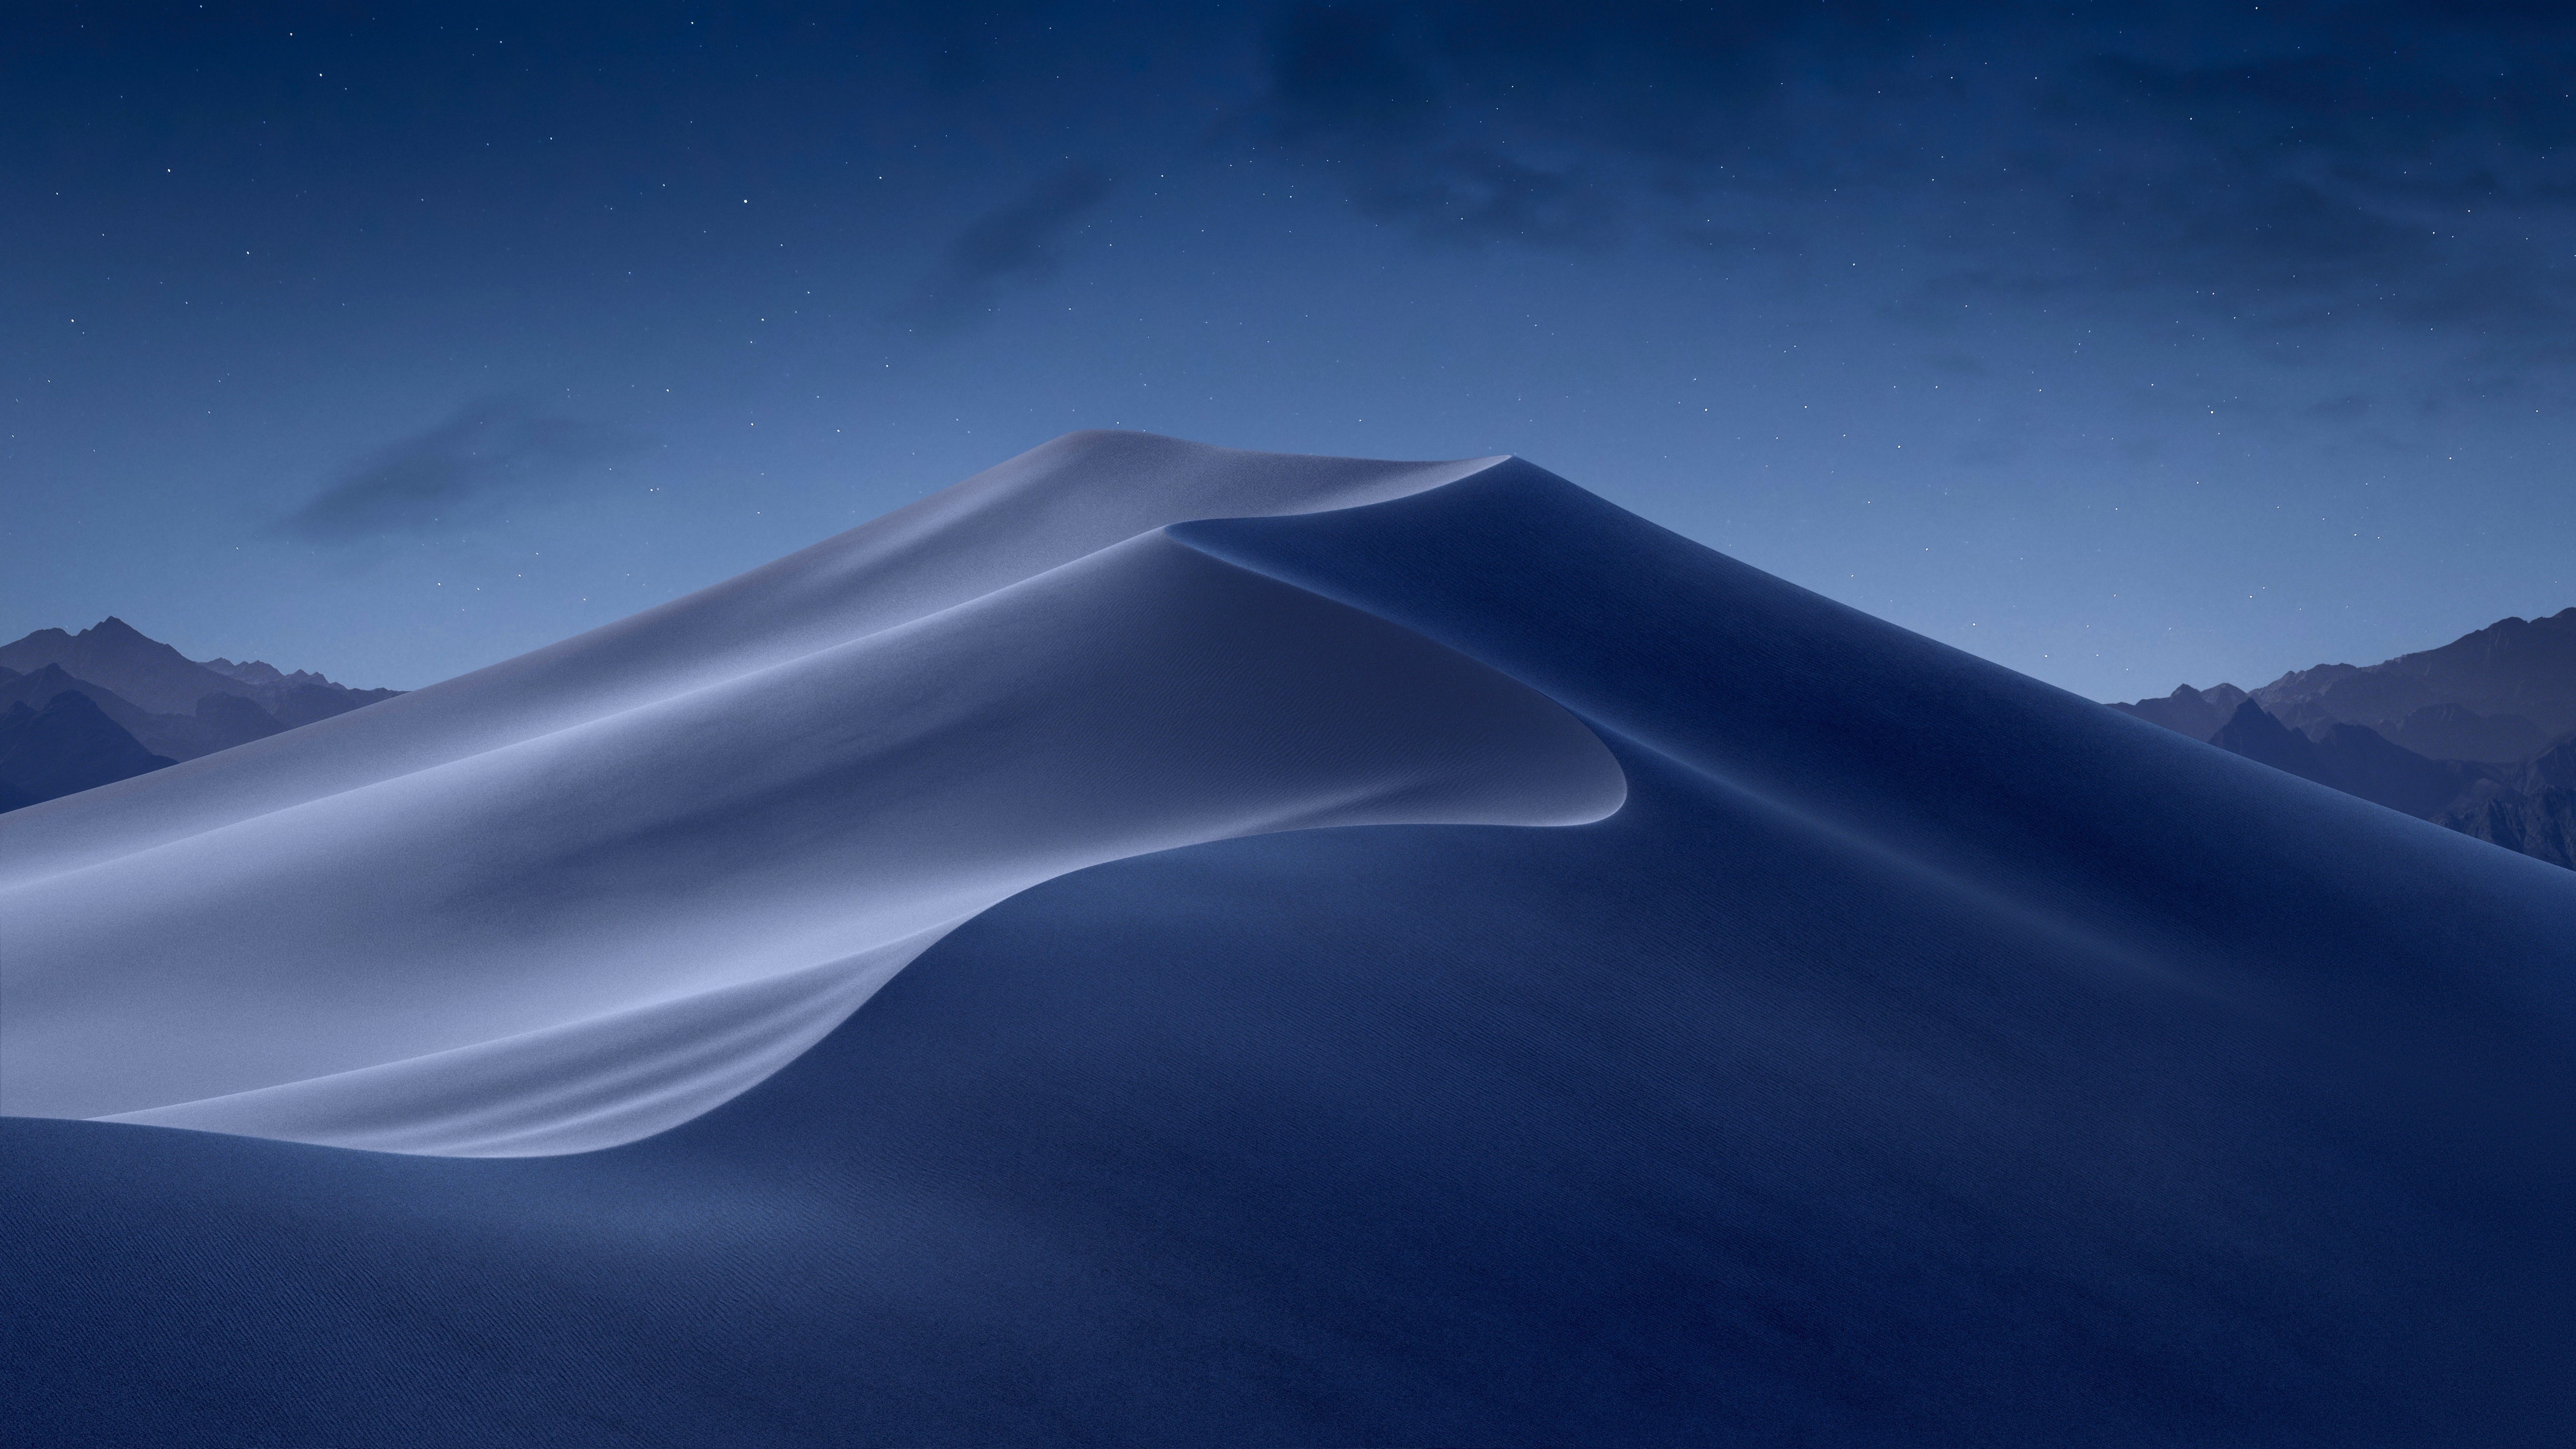 Grab the 2 Default macOS Mojave Wallpapers | OSXDaily